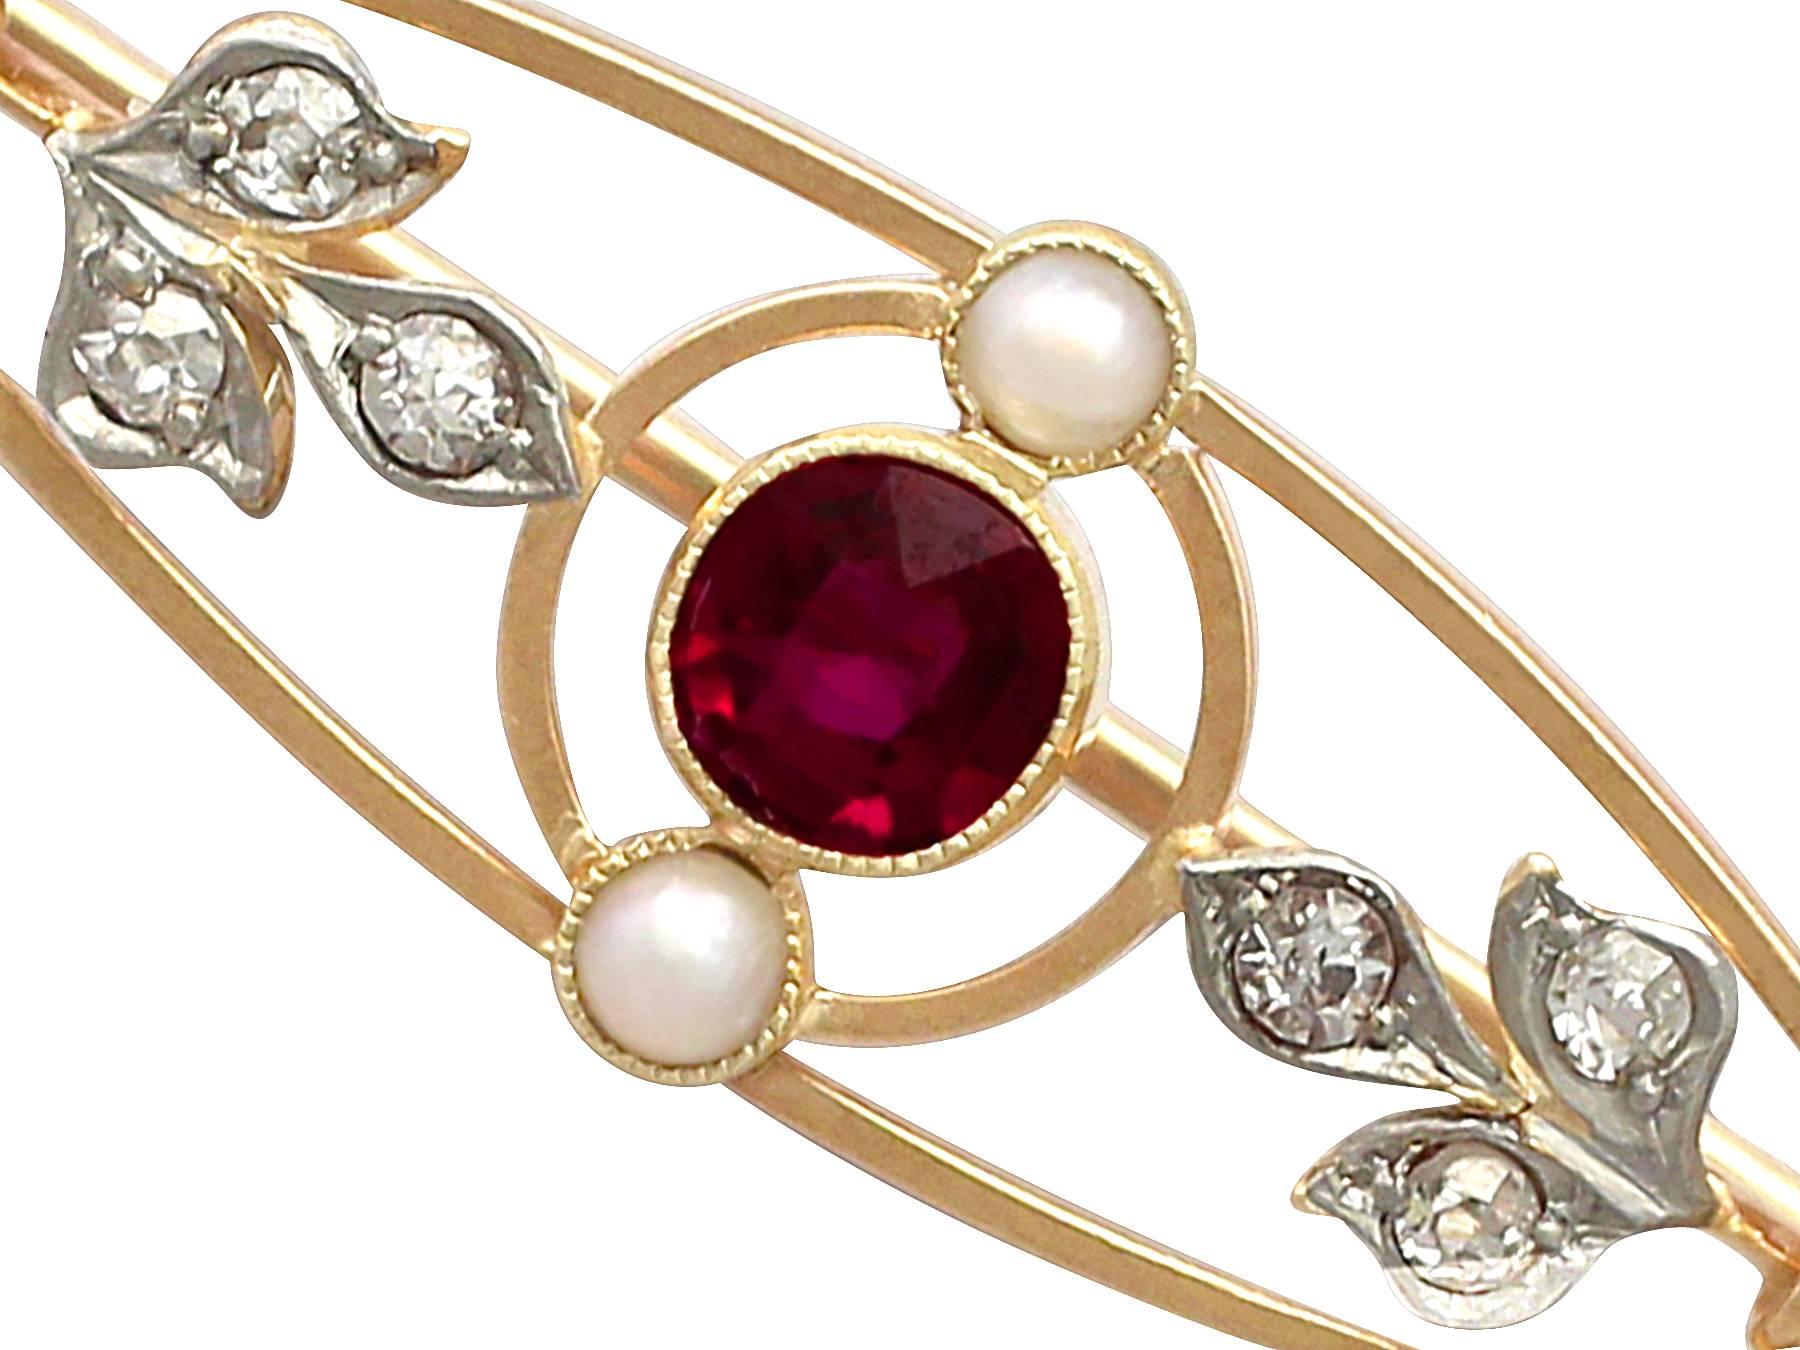 A fine and impressive 0.34 carat natural ruby and 0.18 carat diamond, seed pearl and 9 carat yellow gold brooch with a platinum setting; part of our diverse antique jewellery and estate jewelry collections

This fine and impressive antique brooch